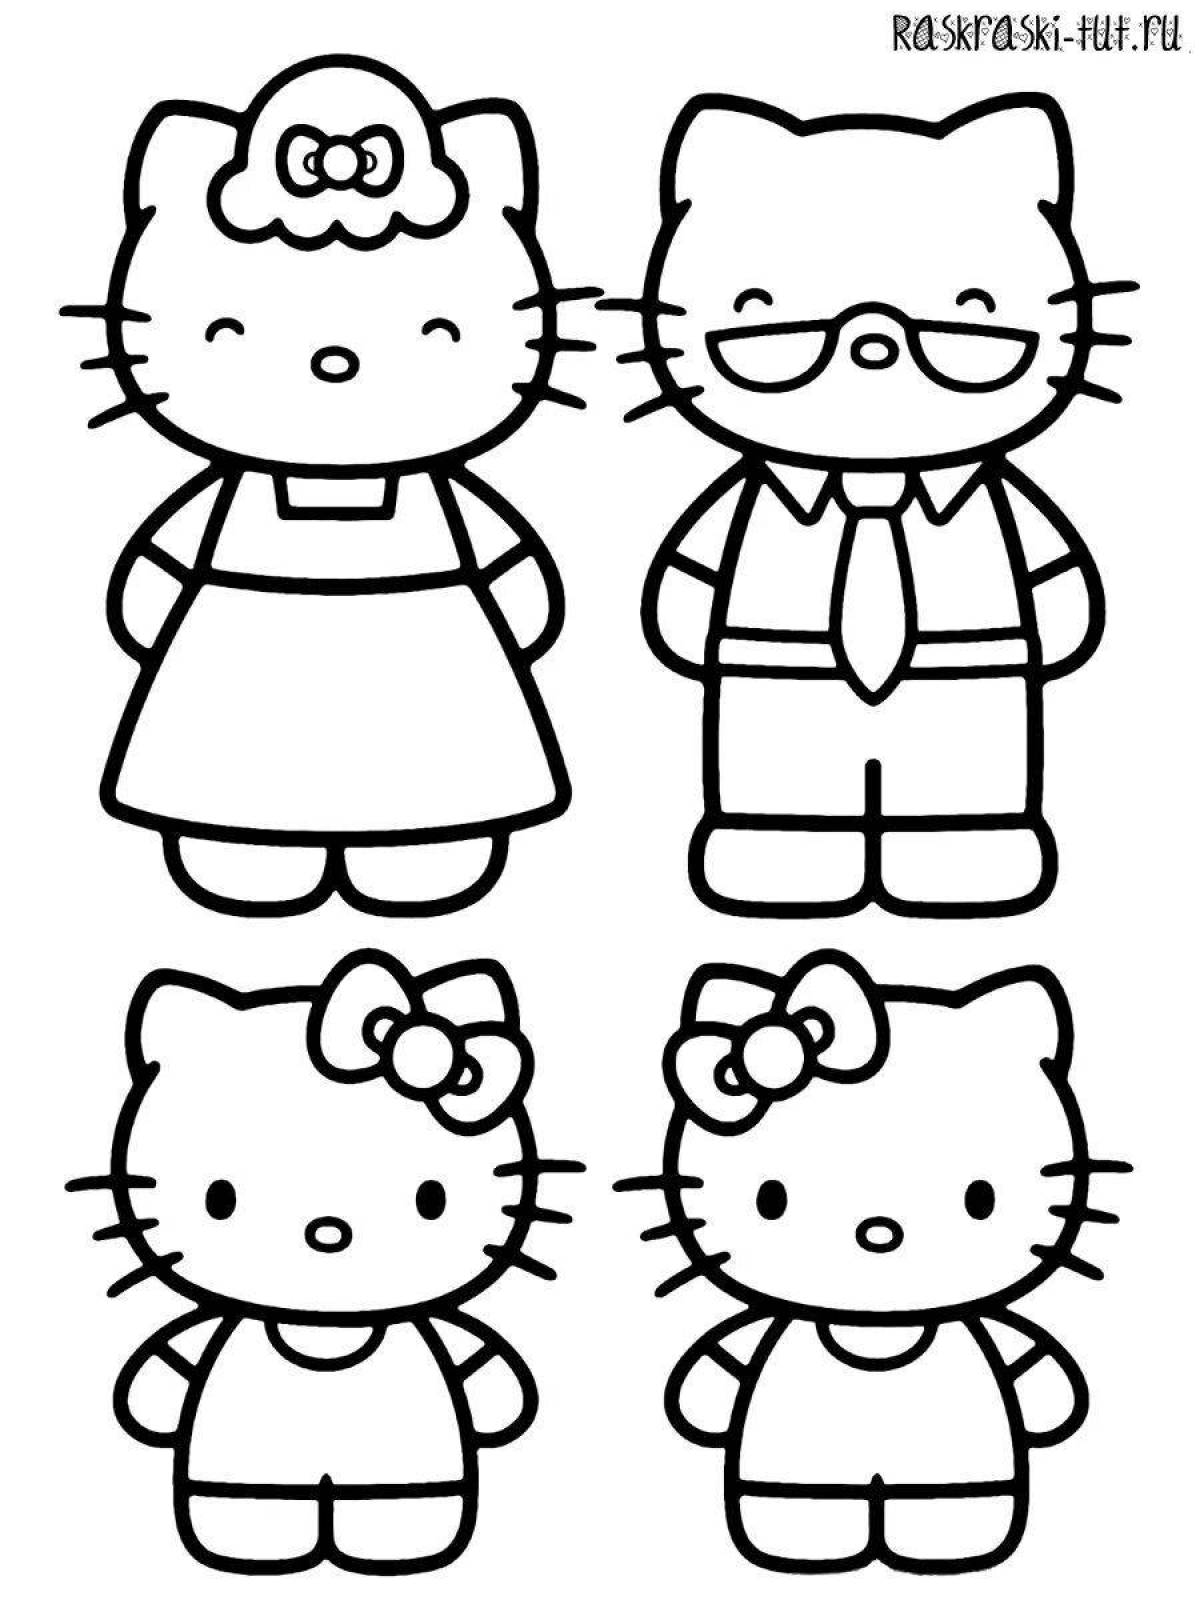 Fantastic hello kitty coloring page